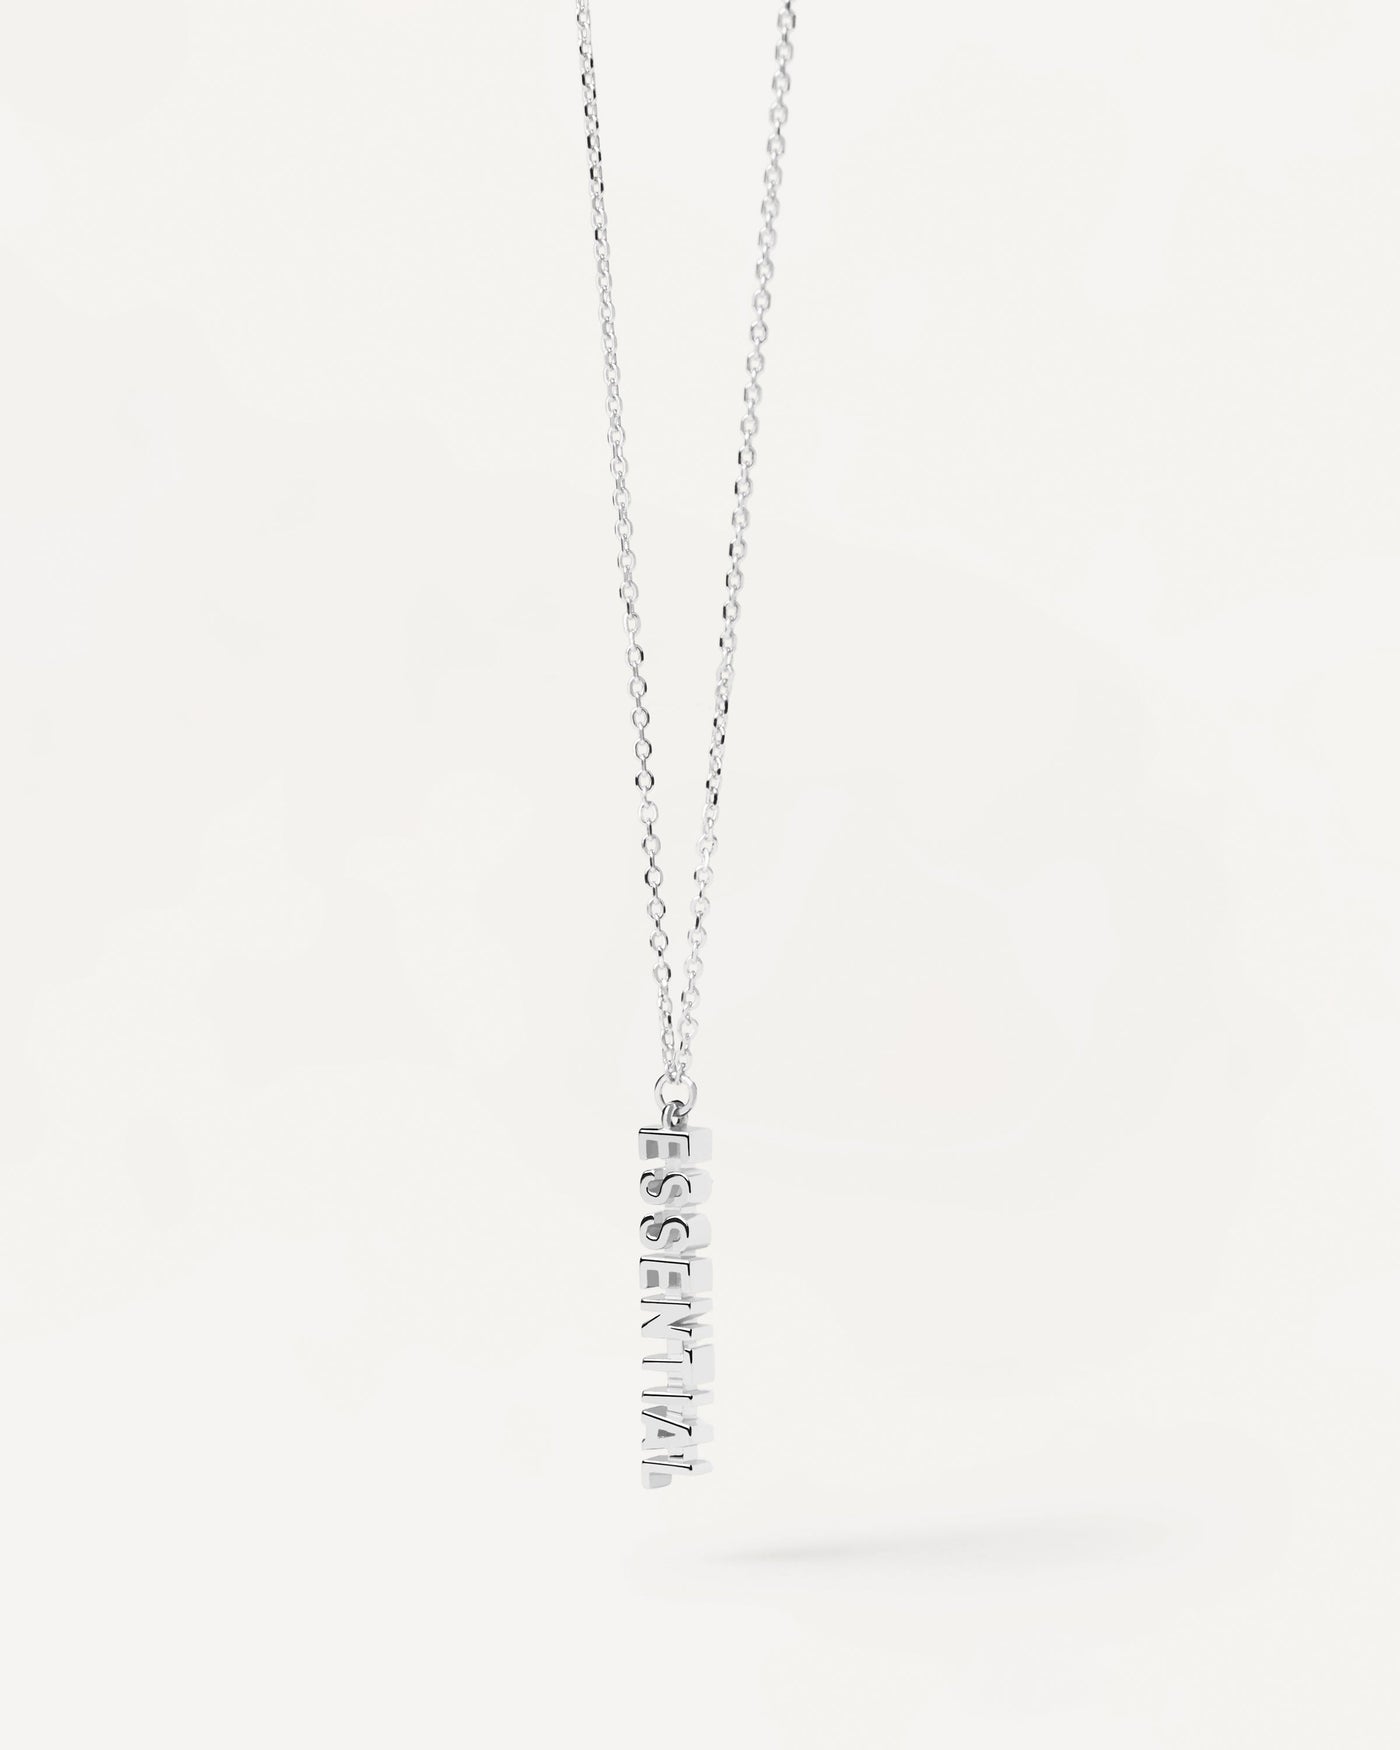 2023 Selection | Essential Silver Necklace. Sterling silver necklace with a word pendant: Essential. Get the latest arrival from PDPAOLA. Place your order safely and get this Best Seller. Free Shipping.